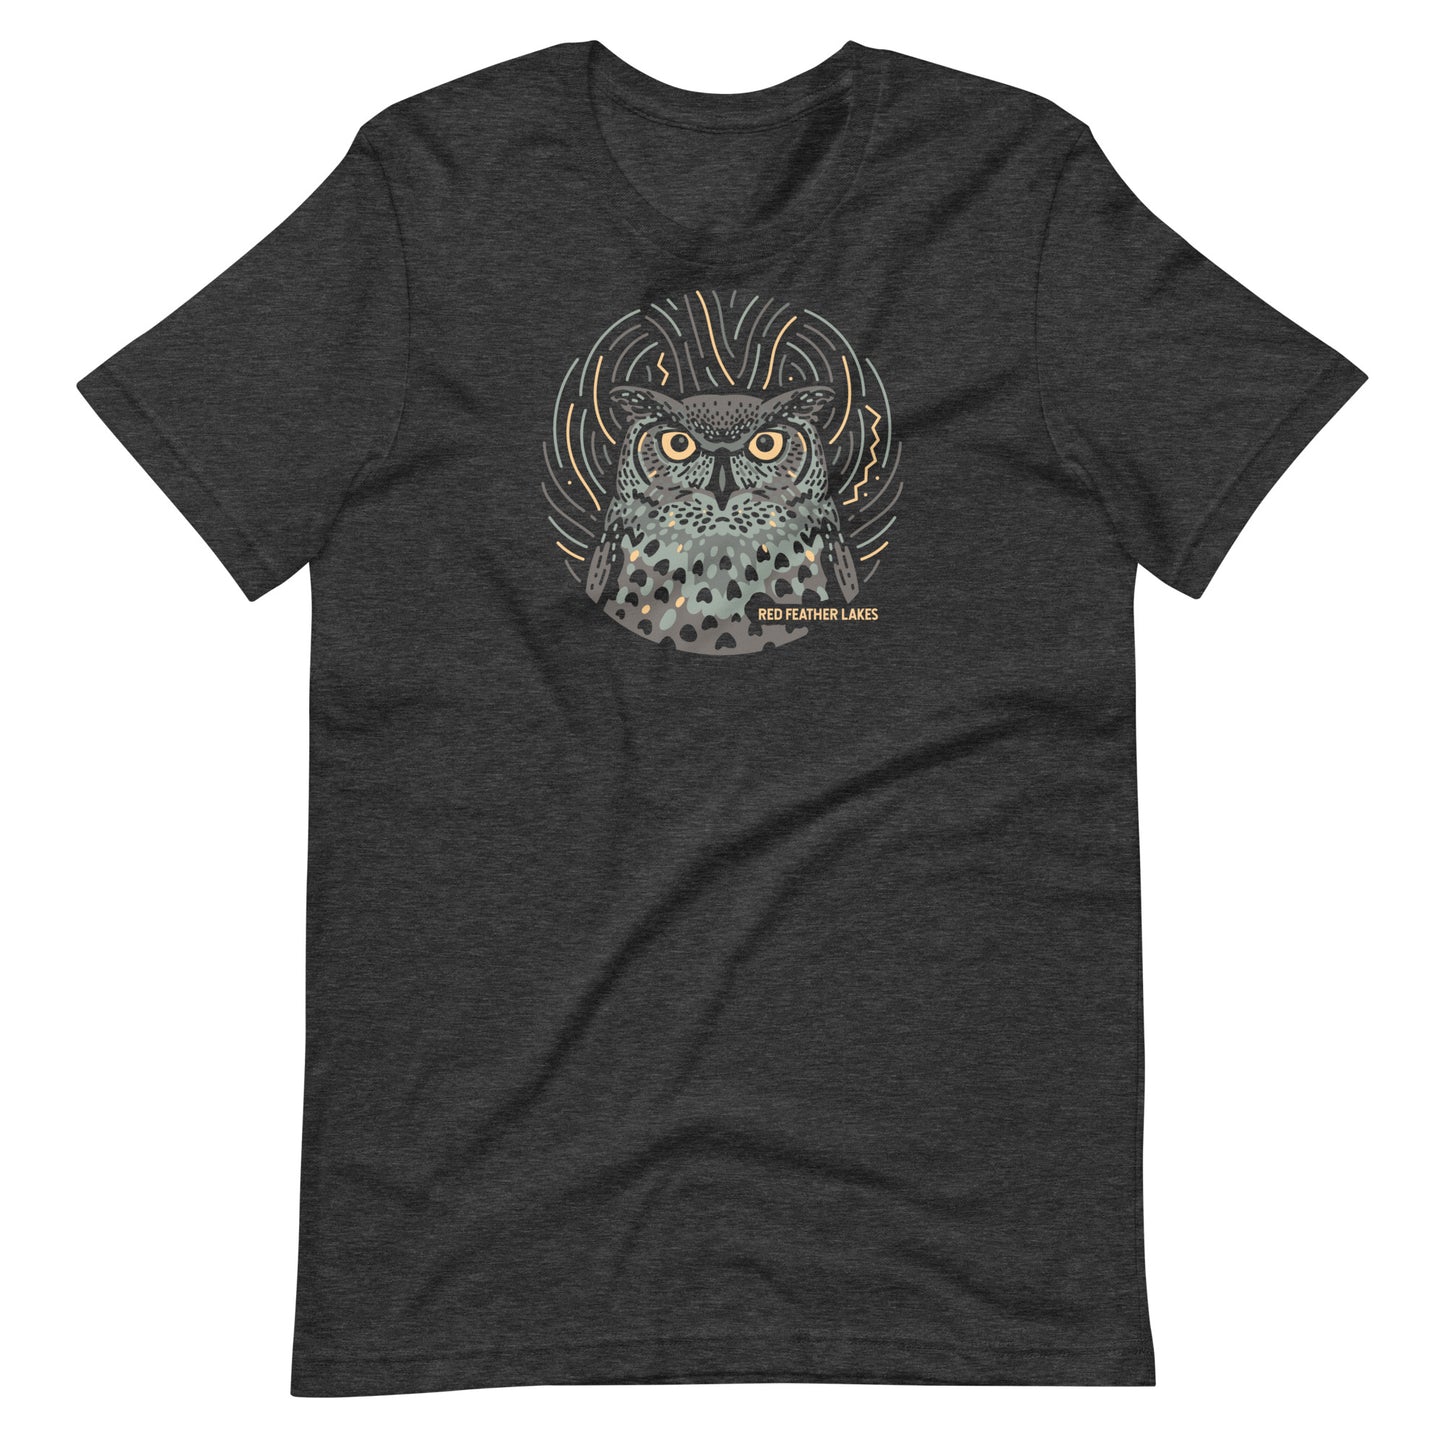 Athletic fit t-shirt by Horsetooth'd, featuring a unique design inspired by the wildlife of Red Feather Lakes.